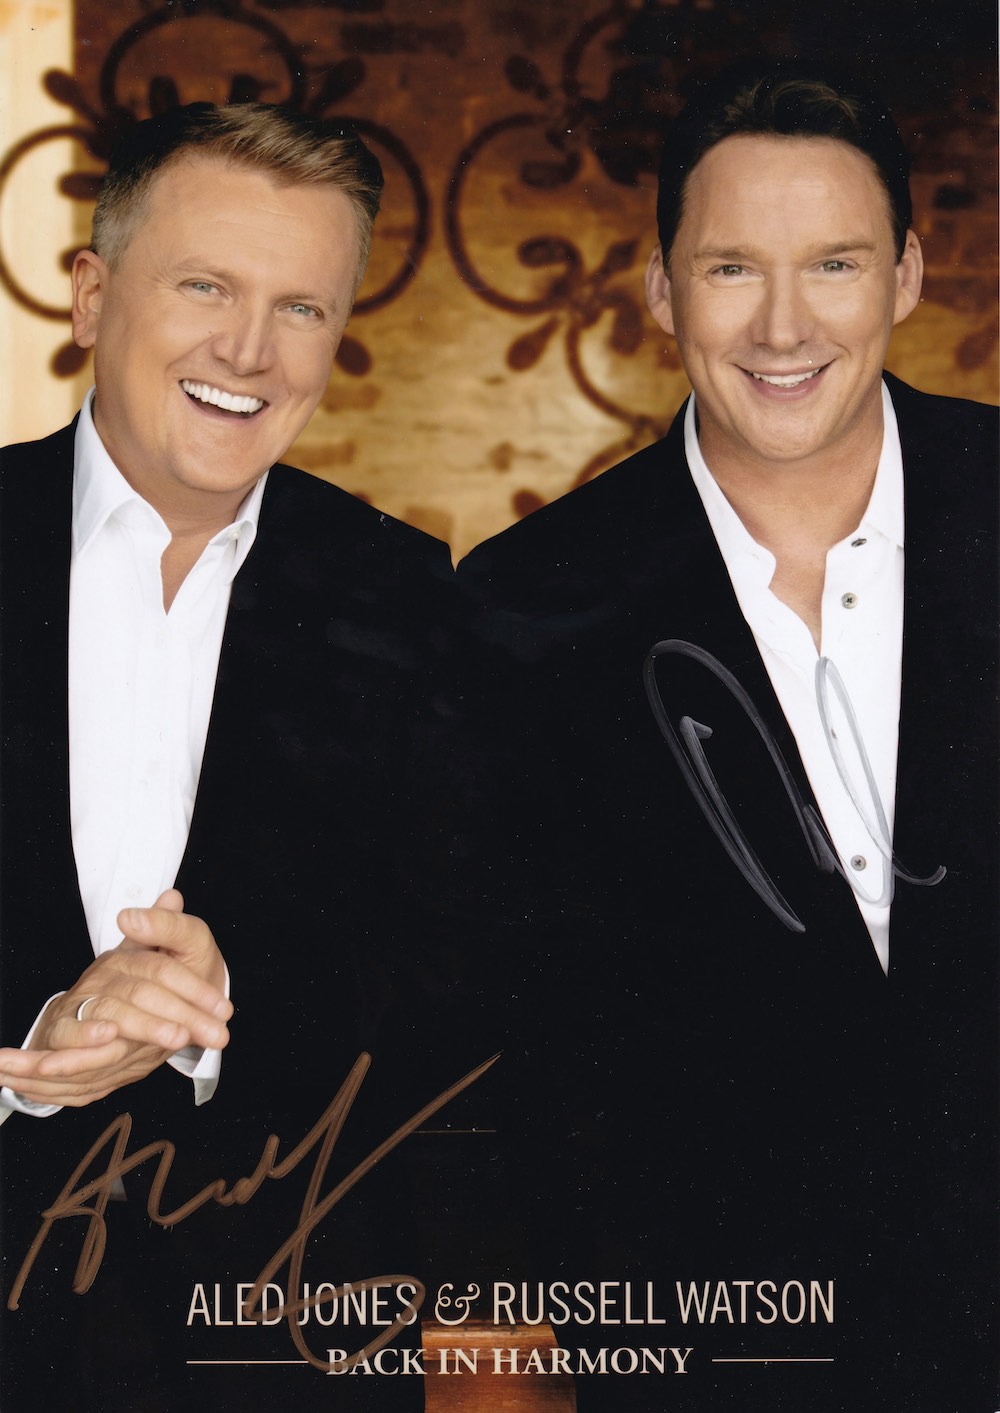 Russell Watson and Aled Jones Classical Singing Duo 12x8 inch Signed Photo. Good Condition. All